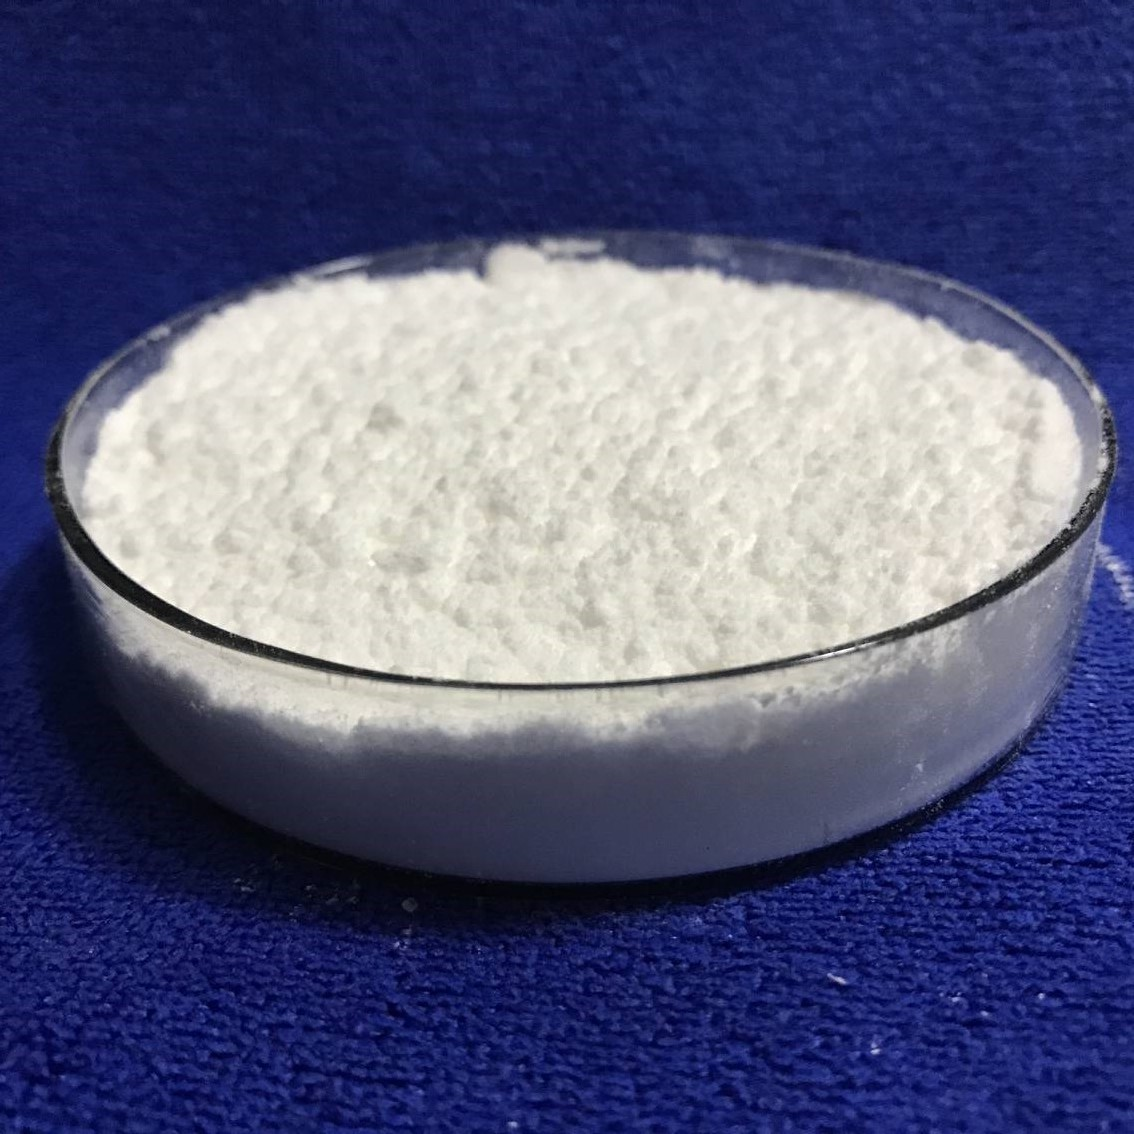 Palladium hydroxide on activated carbon